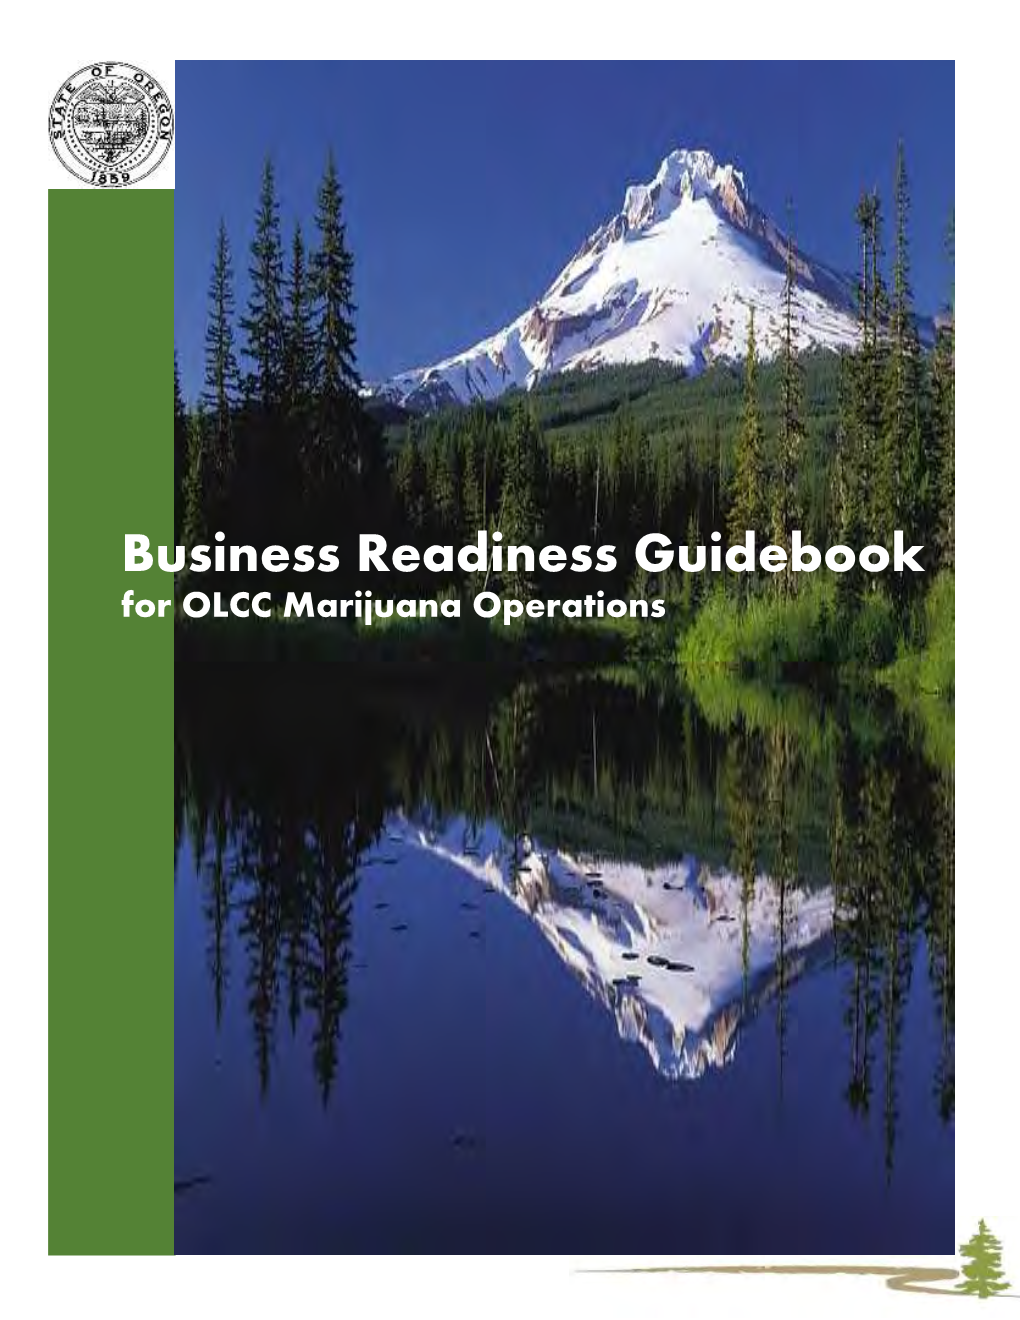 Business Readiness Guidebook for OLCC Marijuana Operations